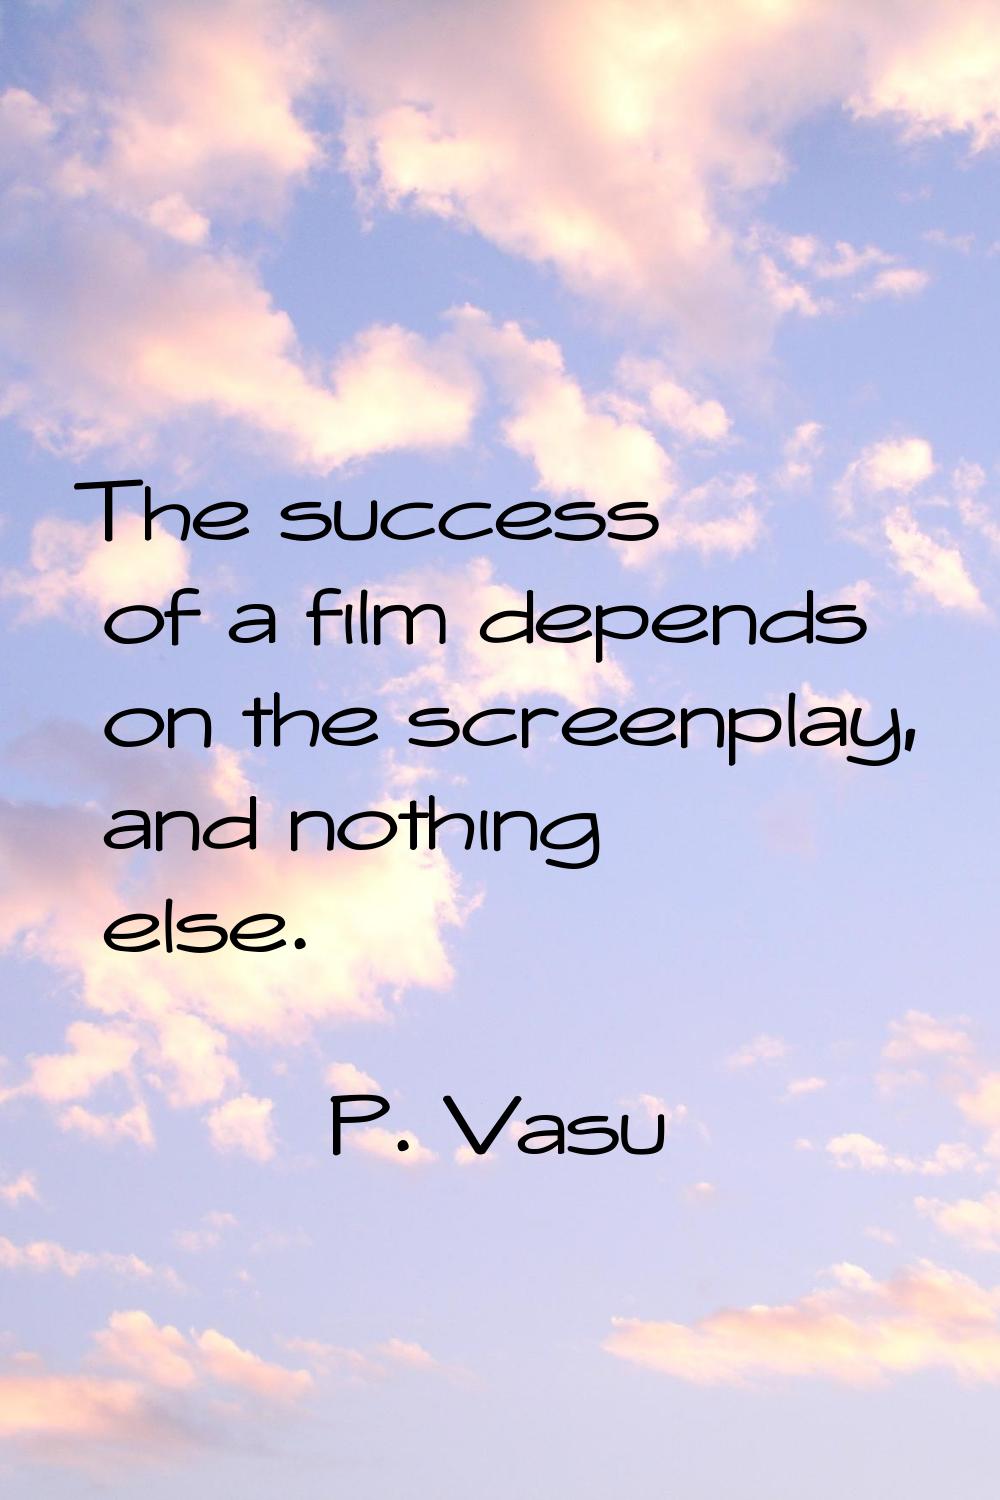 The success of a film depends on the screenplay, and nothing else.